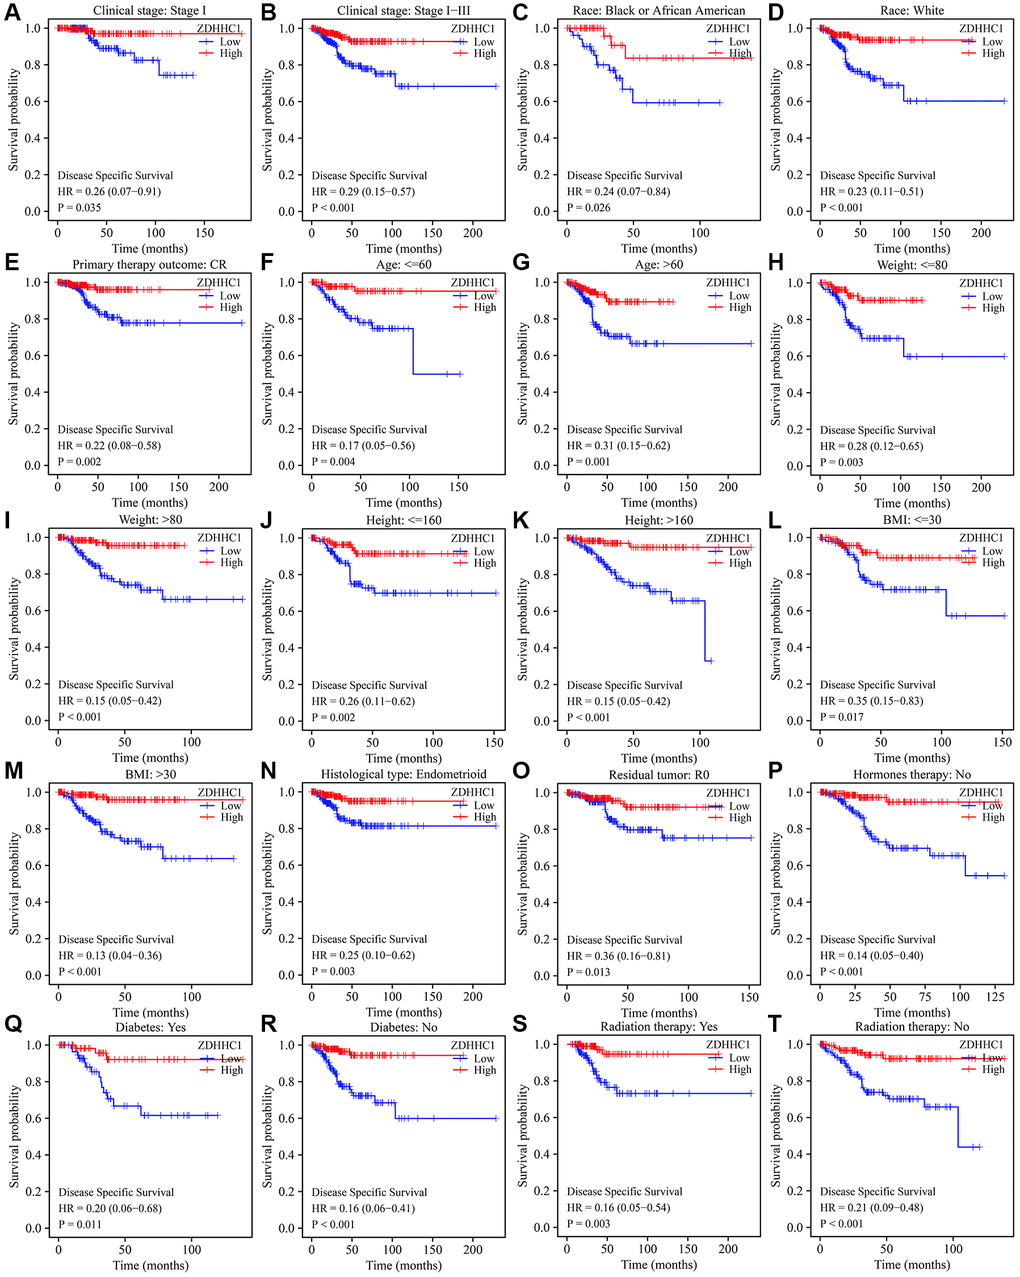 ZDHHC1 expression is related to disease-specific survival in subgroups of patients with UCEC. (A) Tumor stage I. (B) Tumor stage I–III. (C) Black or African American. (D) White. (E) CR. (F) Age ≤60. (G) Age >60. (H) Weight ≤80 kg. (I) Weight >80 kg. (J) Height ≤160 cm. (K) Height >160 cm. (L) BMI ≤30. (M) BMI >30. (N) Histological type of endometrioid. (O) R0. (P) Without hormone therapy. (Q, R) With/without diabetes. (S, T) With/without radiation therapy. Abbreviations: UCEC: uterine corpus endometrial carcinoma; ZDHHC1: zinc finger DHHC-type containing 1; CR: complete response; BMI: body mass index; R0: residual tumor.